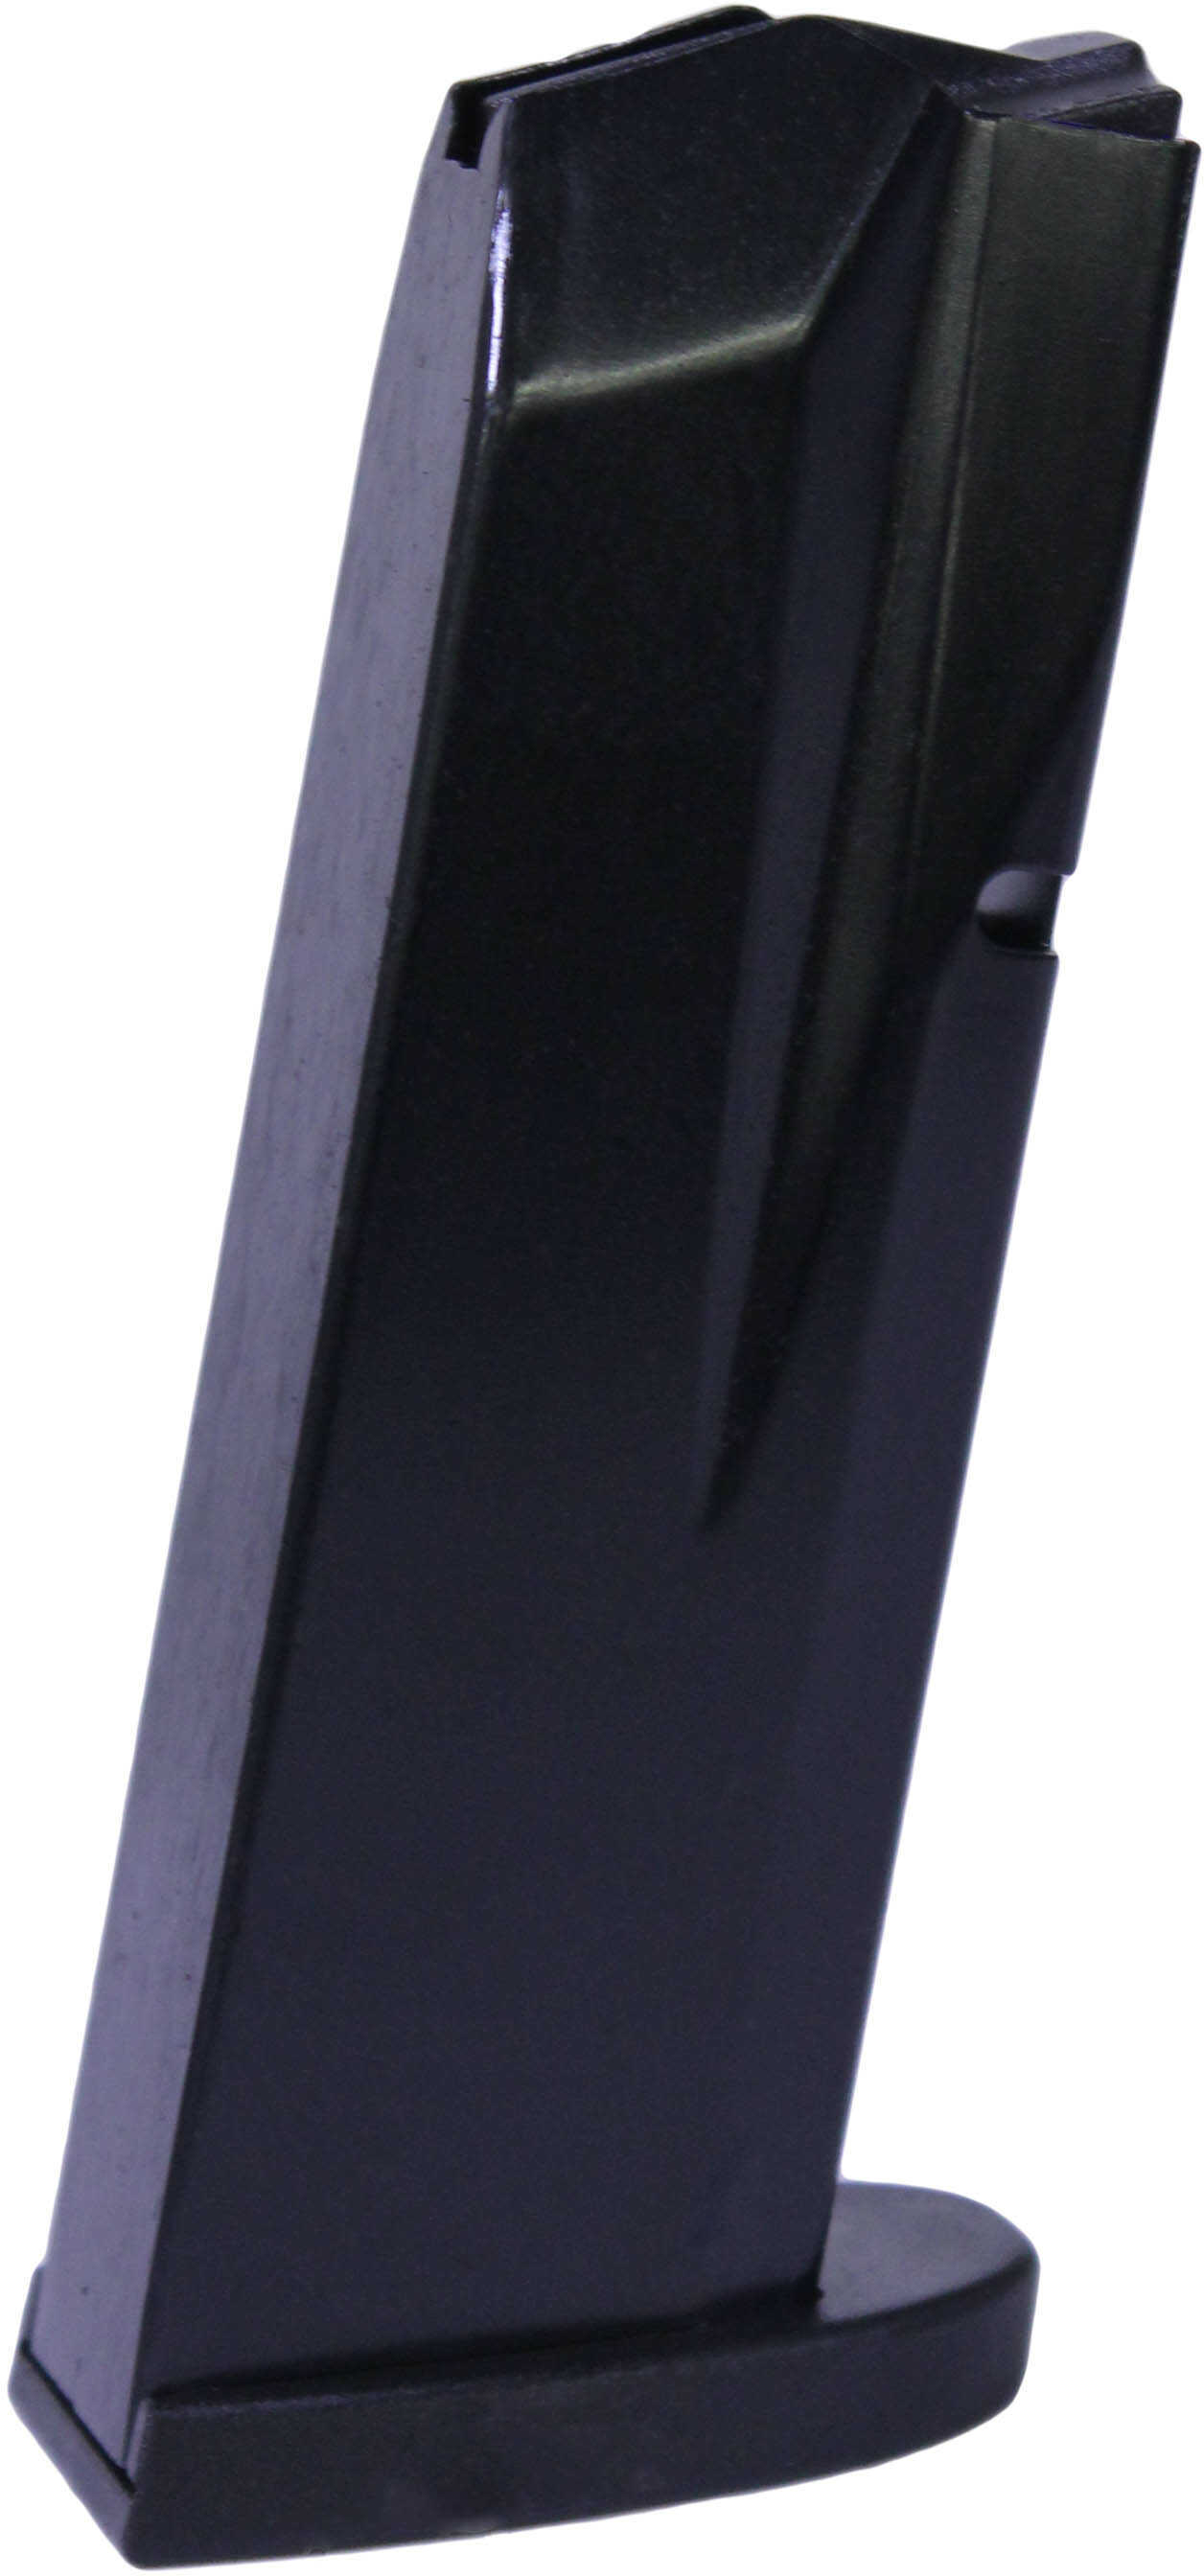 ProMag Smith & Wesson M&P Magazine .45 ACP 10 Rounds Blue Steel Md: 32